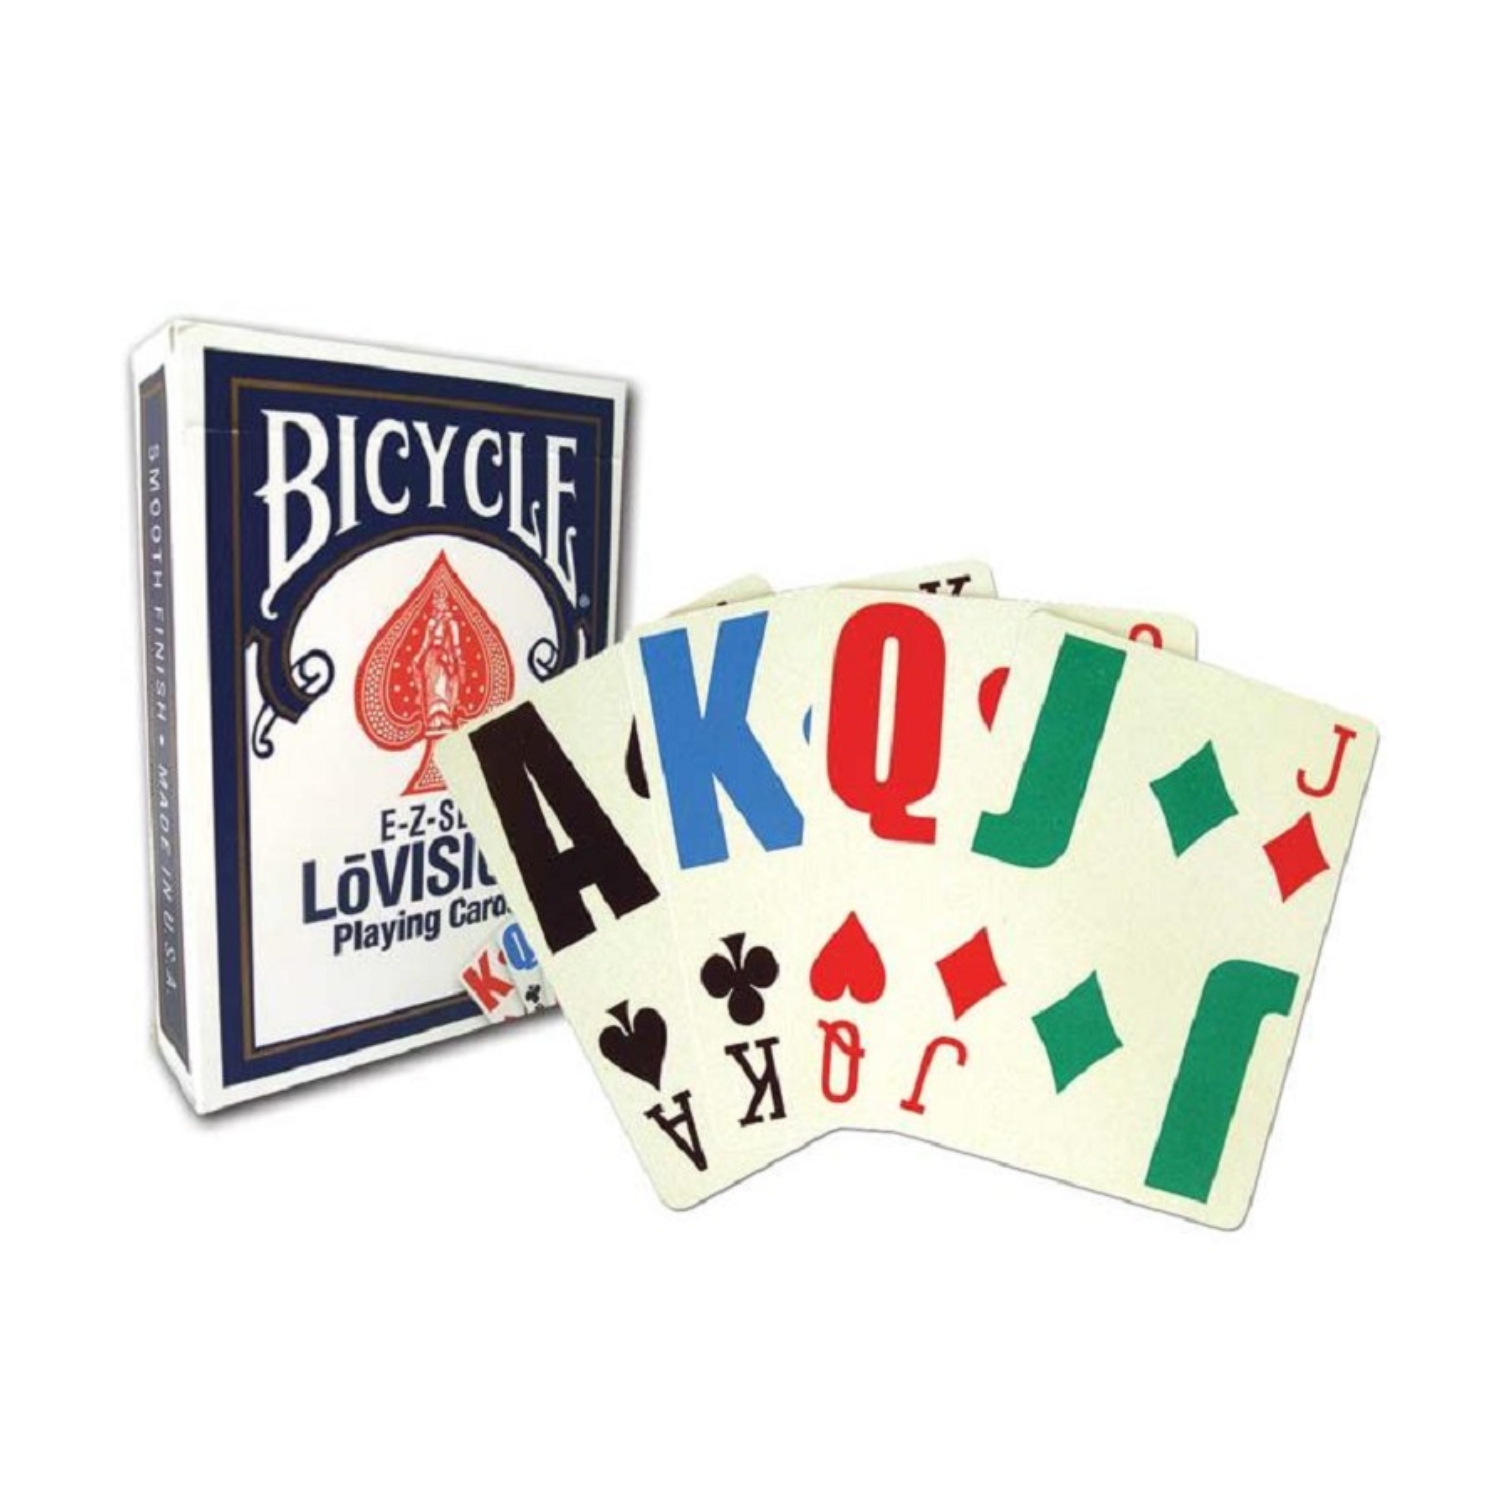 Image of Bicycle e-z-see lo-vision playing cards, pack with card close-ups